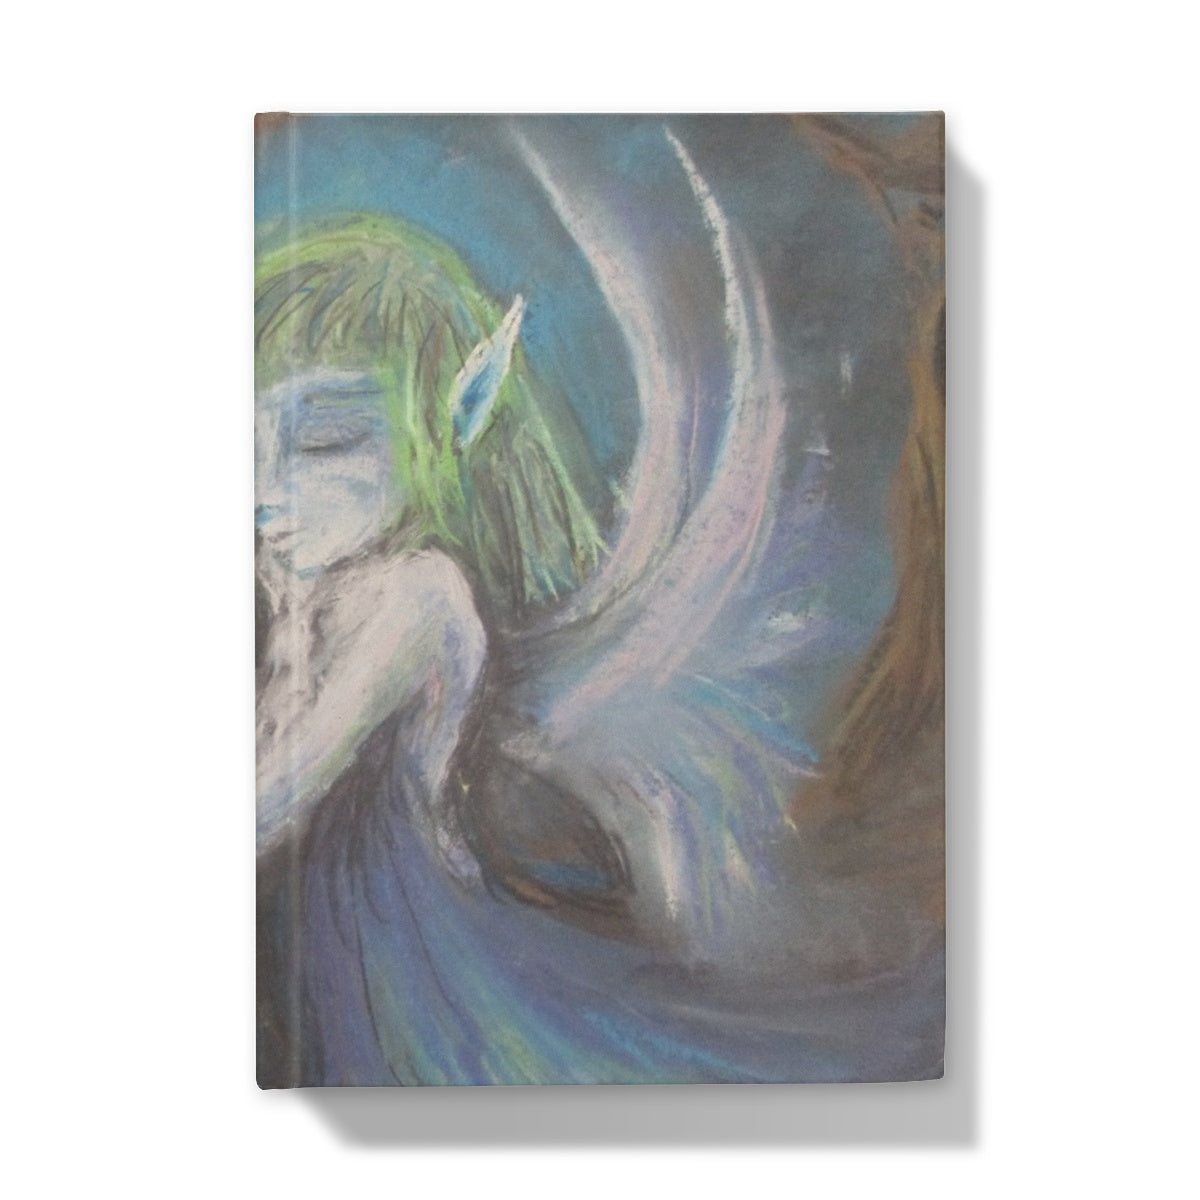 Poet and her Soul Speaking Paintings ~  prints, originals and more    In the forest of the night One goes with insight Alone walk in the woods Twinkling with a heart full of goods  Original Artwork and Poetry of Artist Jen Shearer     This is a original soft pastel painting printed on product.